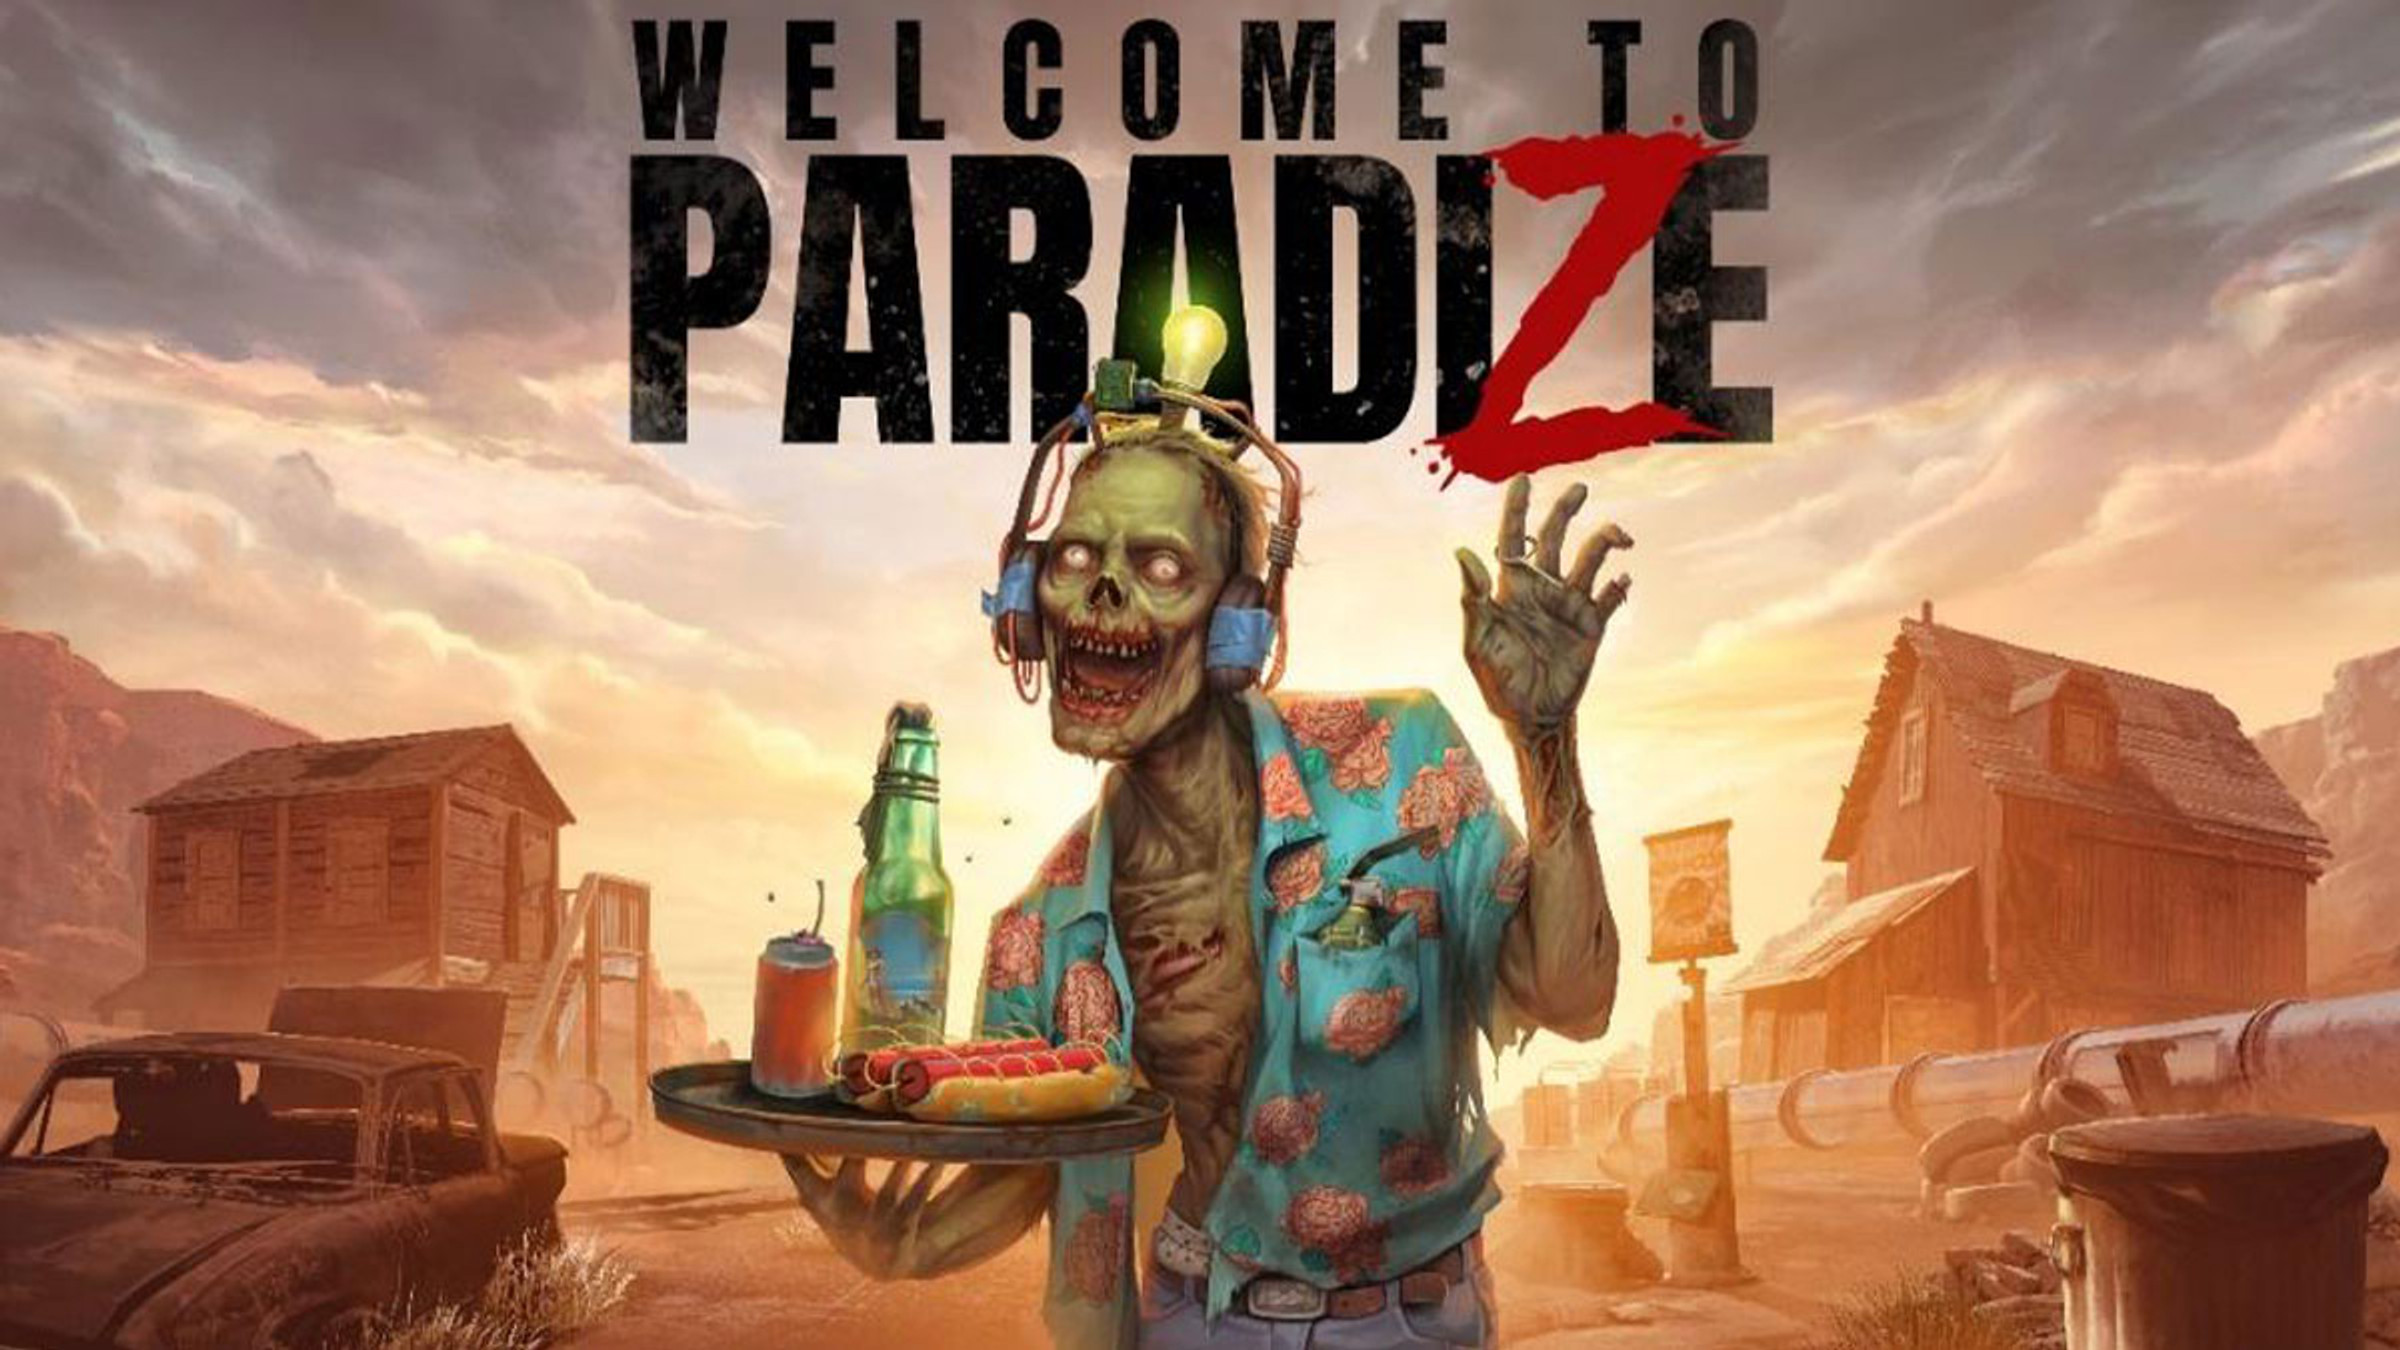 welcome-to-paradize